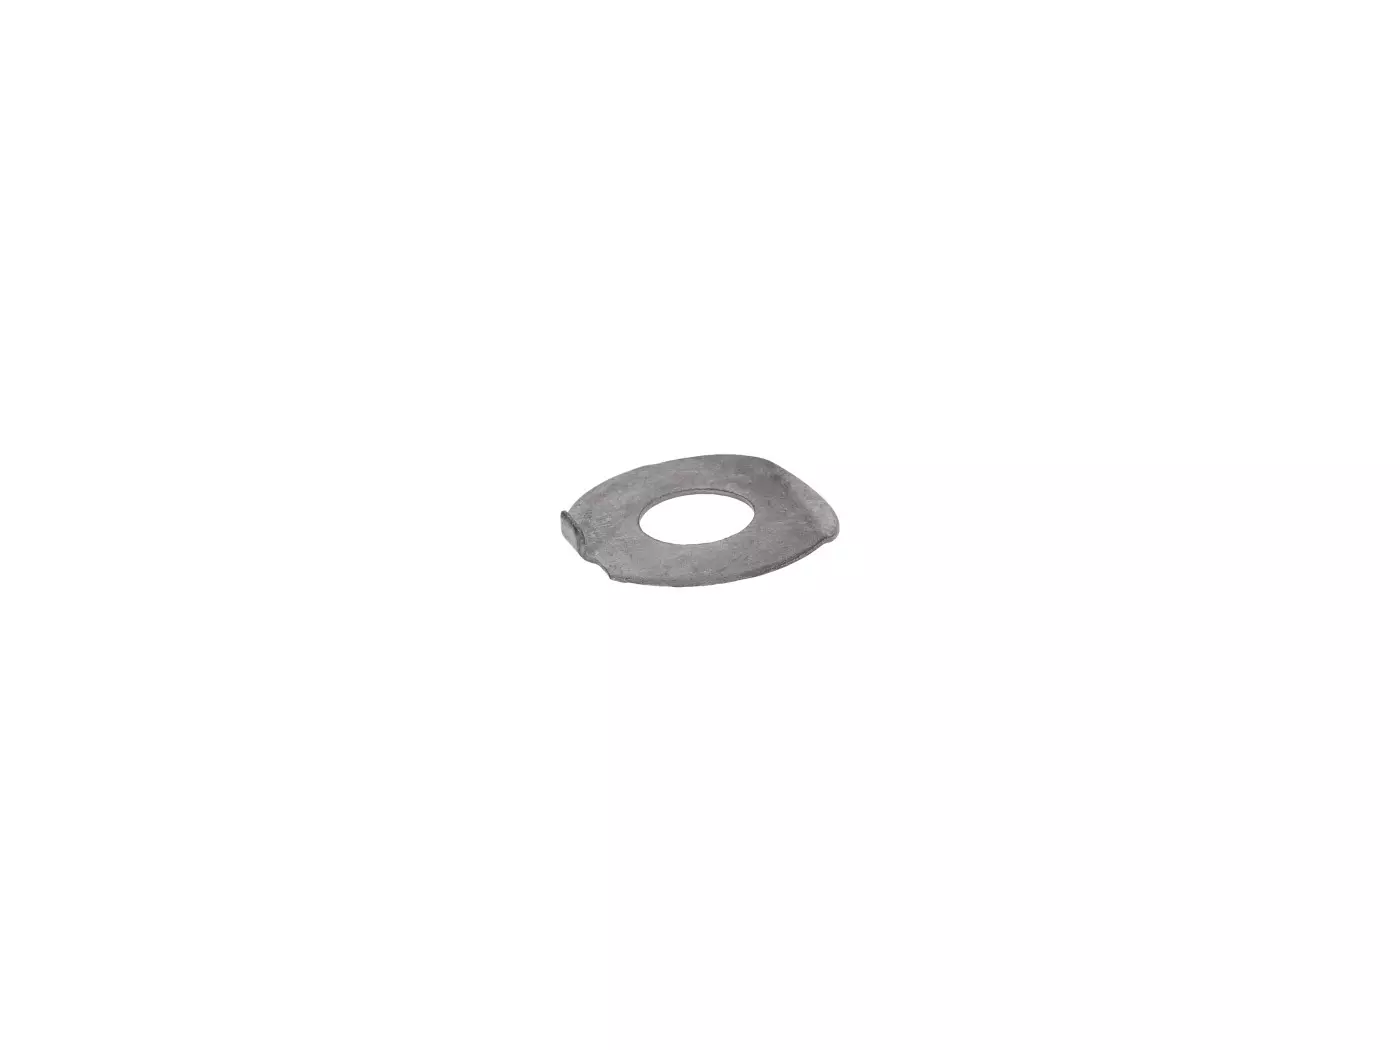 Spacer Disc / Washer OEM D12 For Minarelli AM6